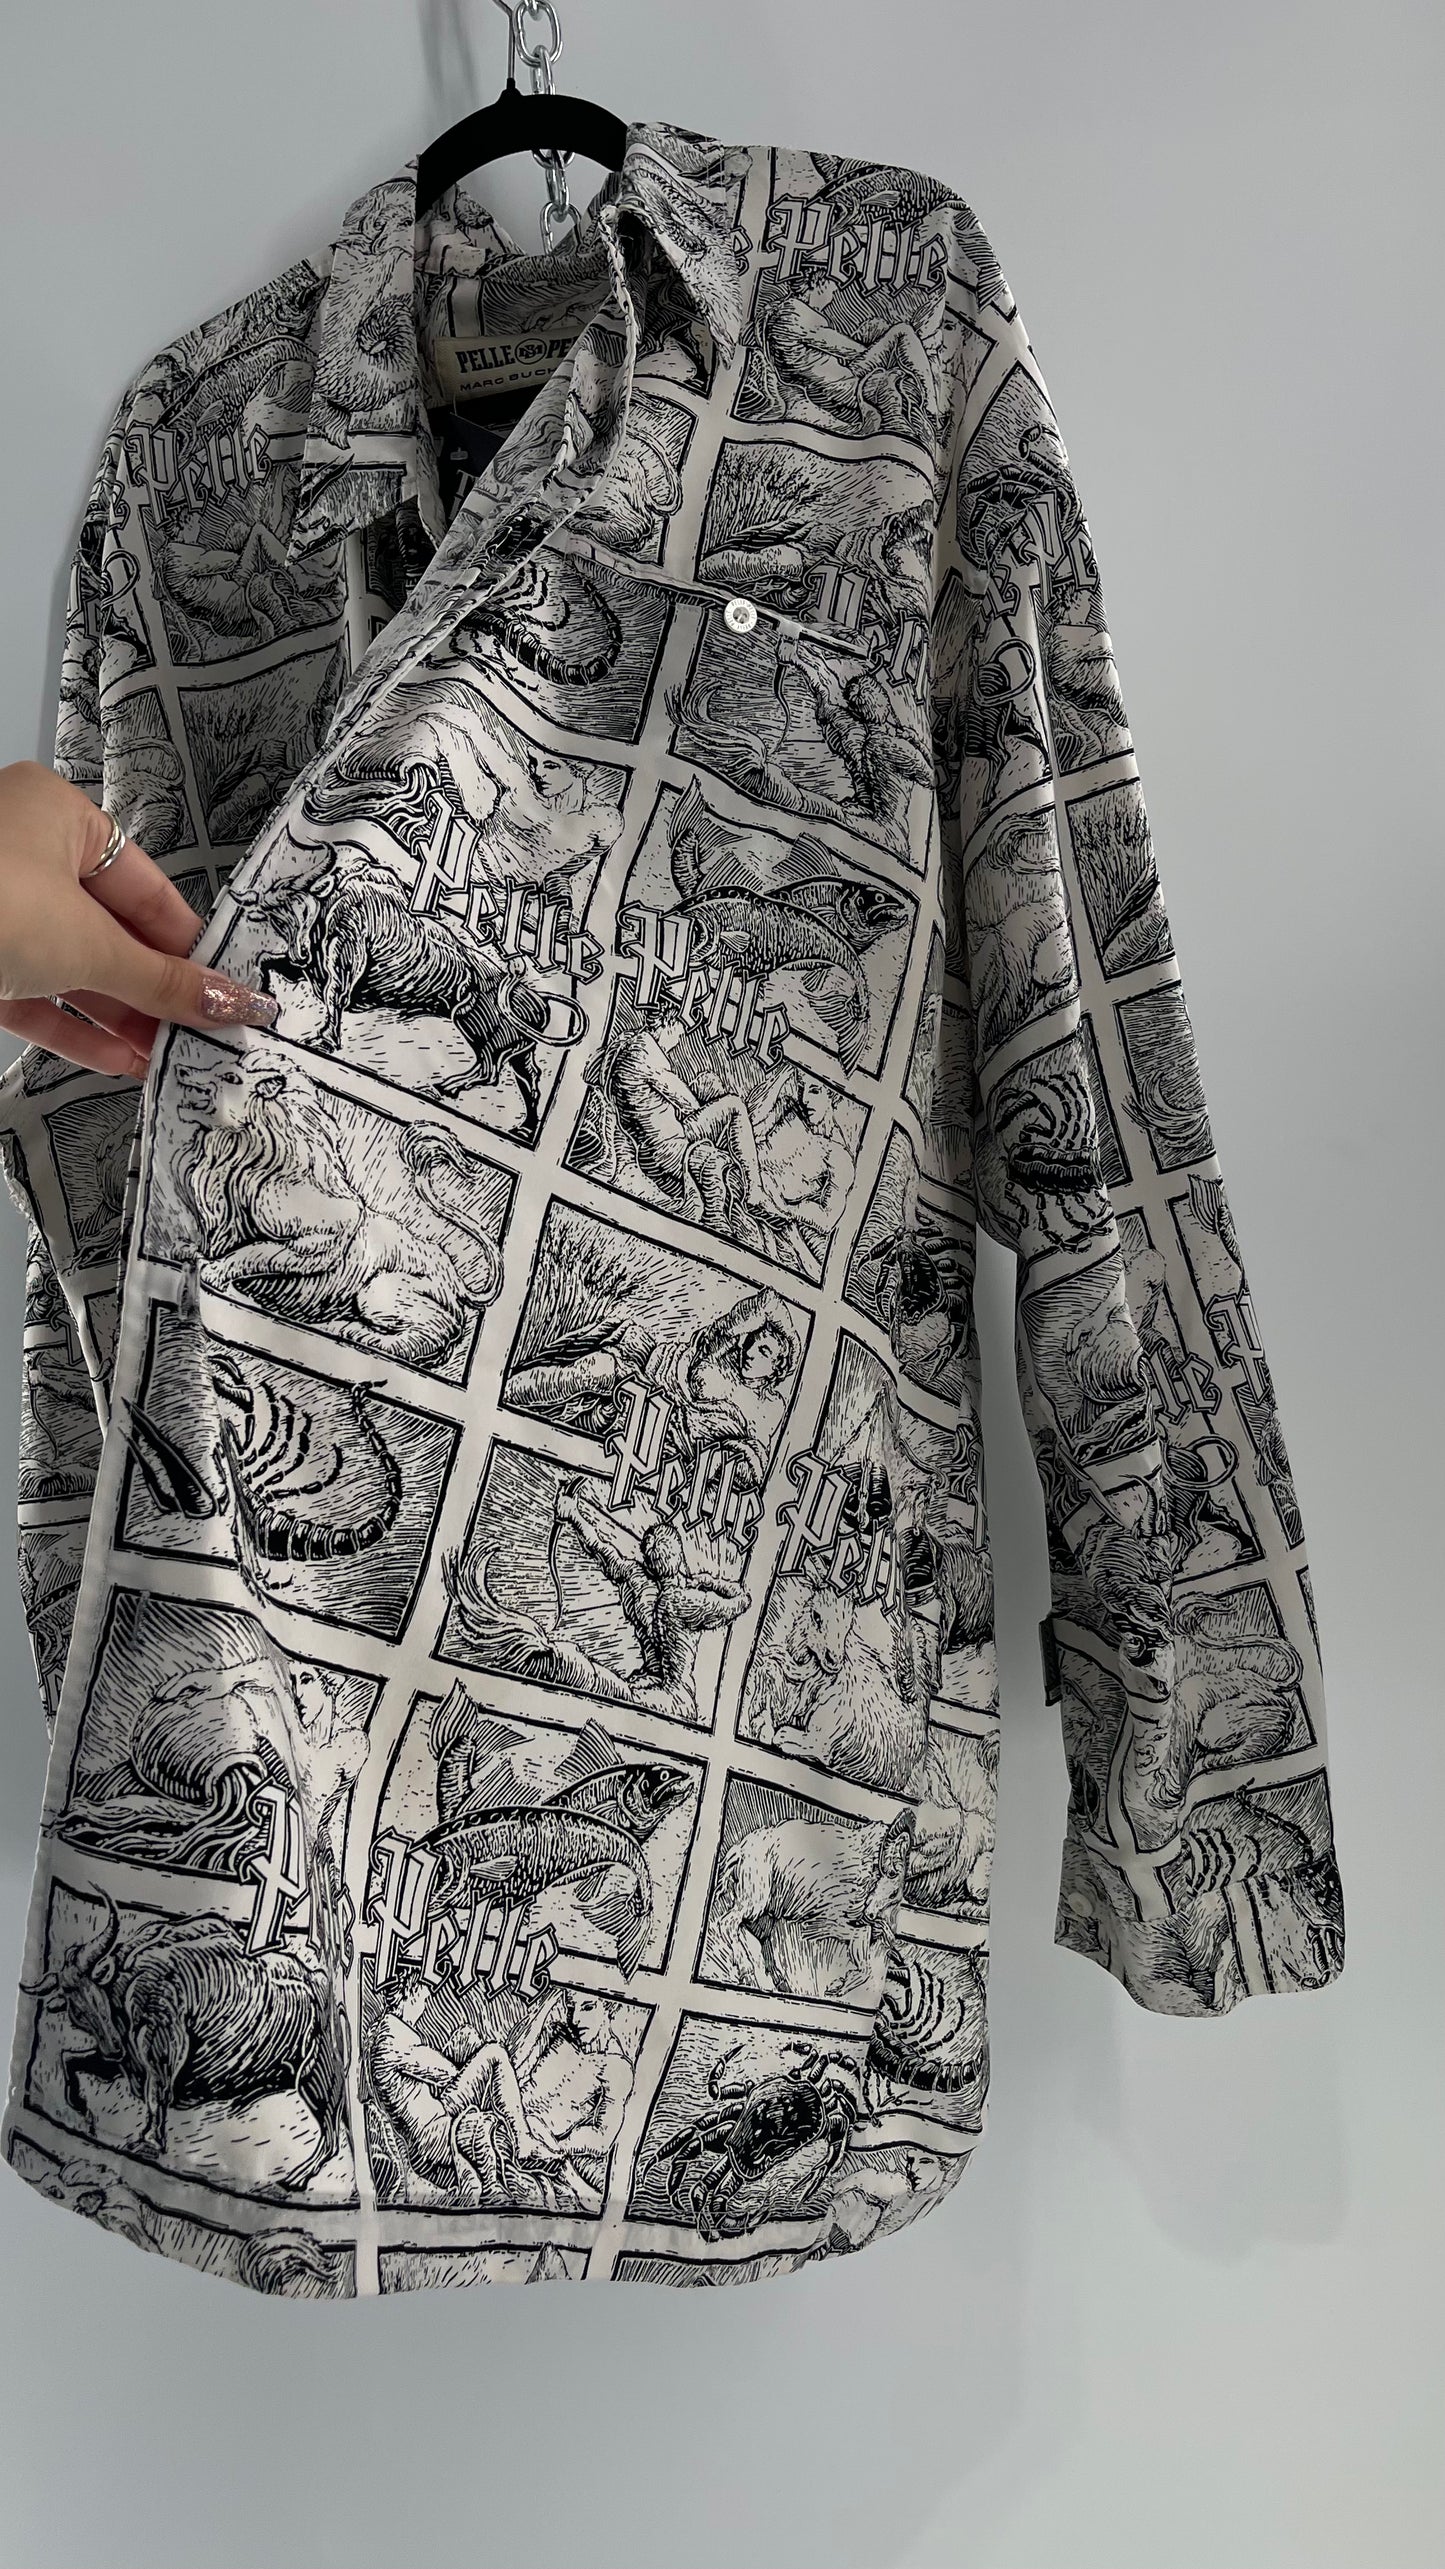 Extremely Rare Vintage PELLE PELLE Zodiac Astrology Comic Strip Graphic Long Sleeve Button Up (3X)